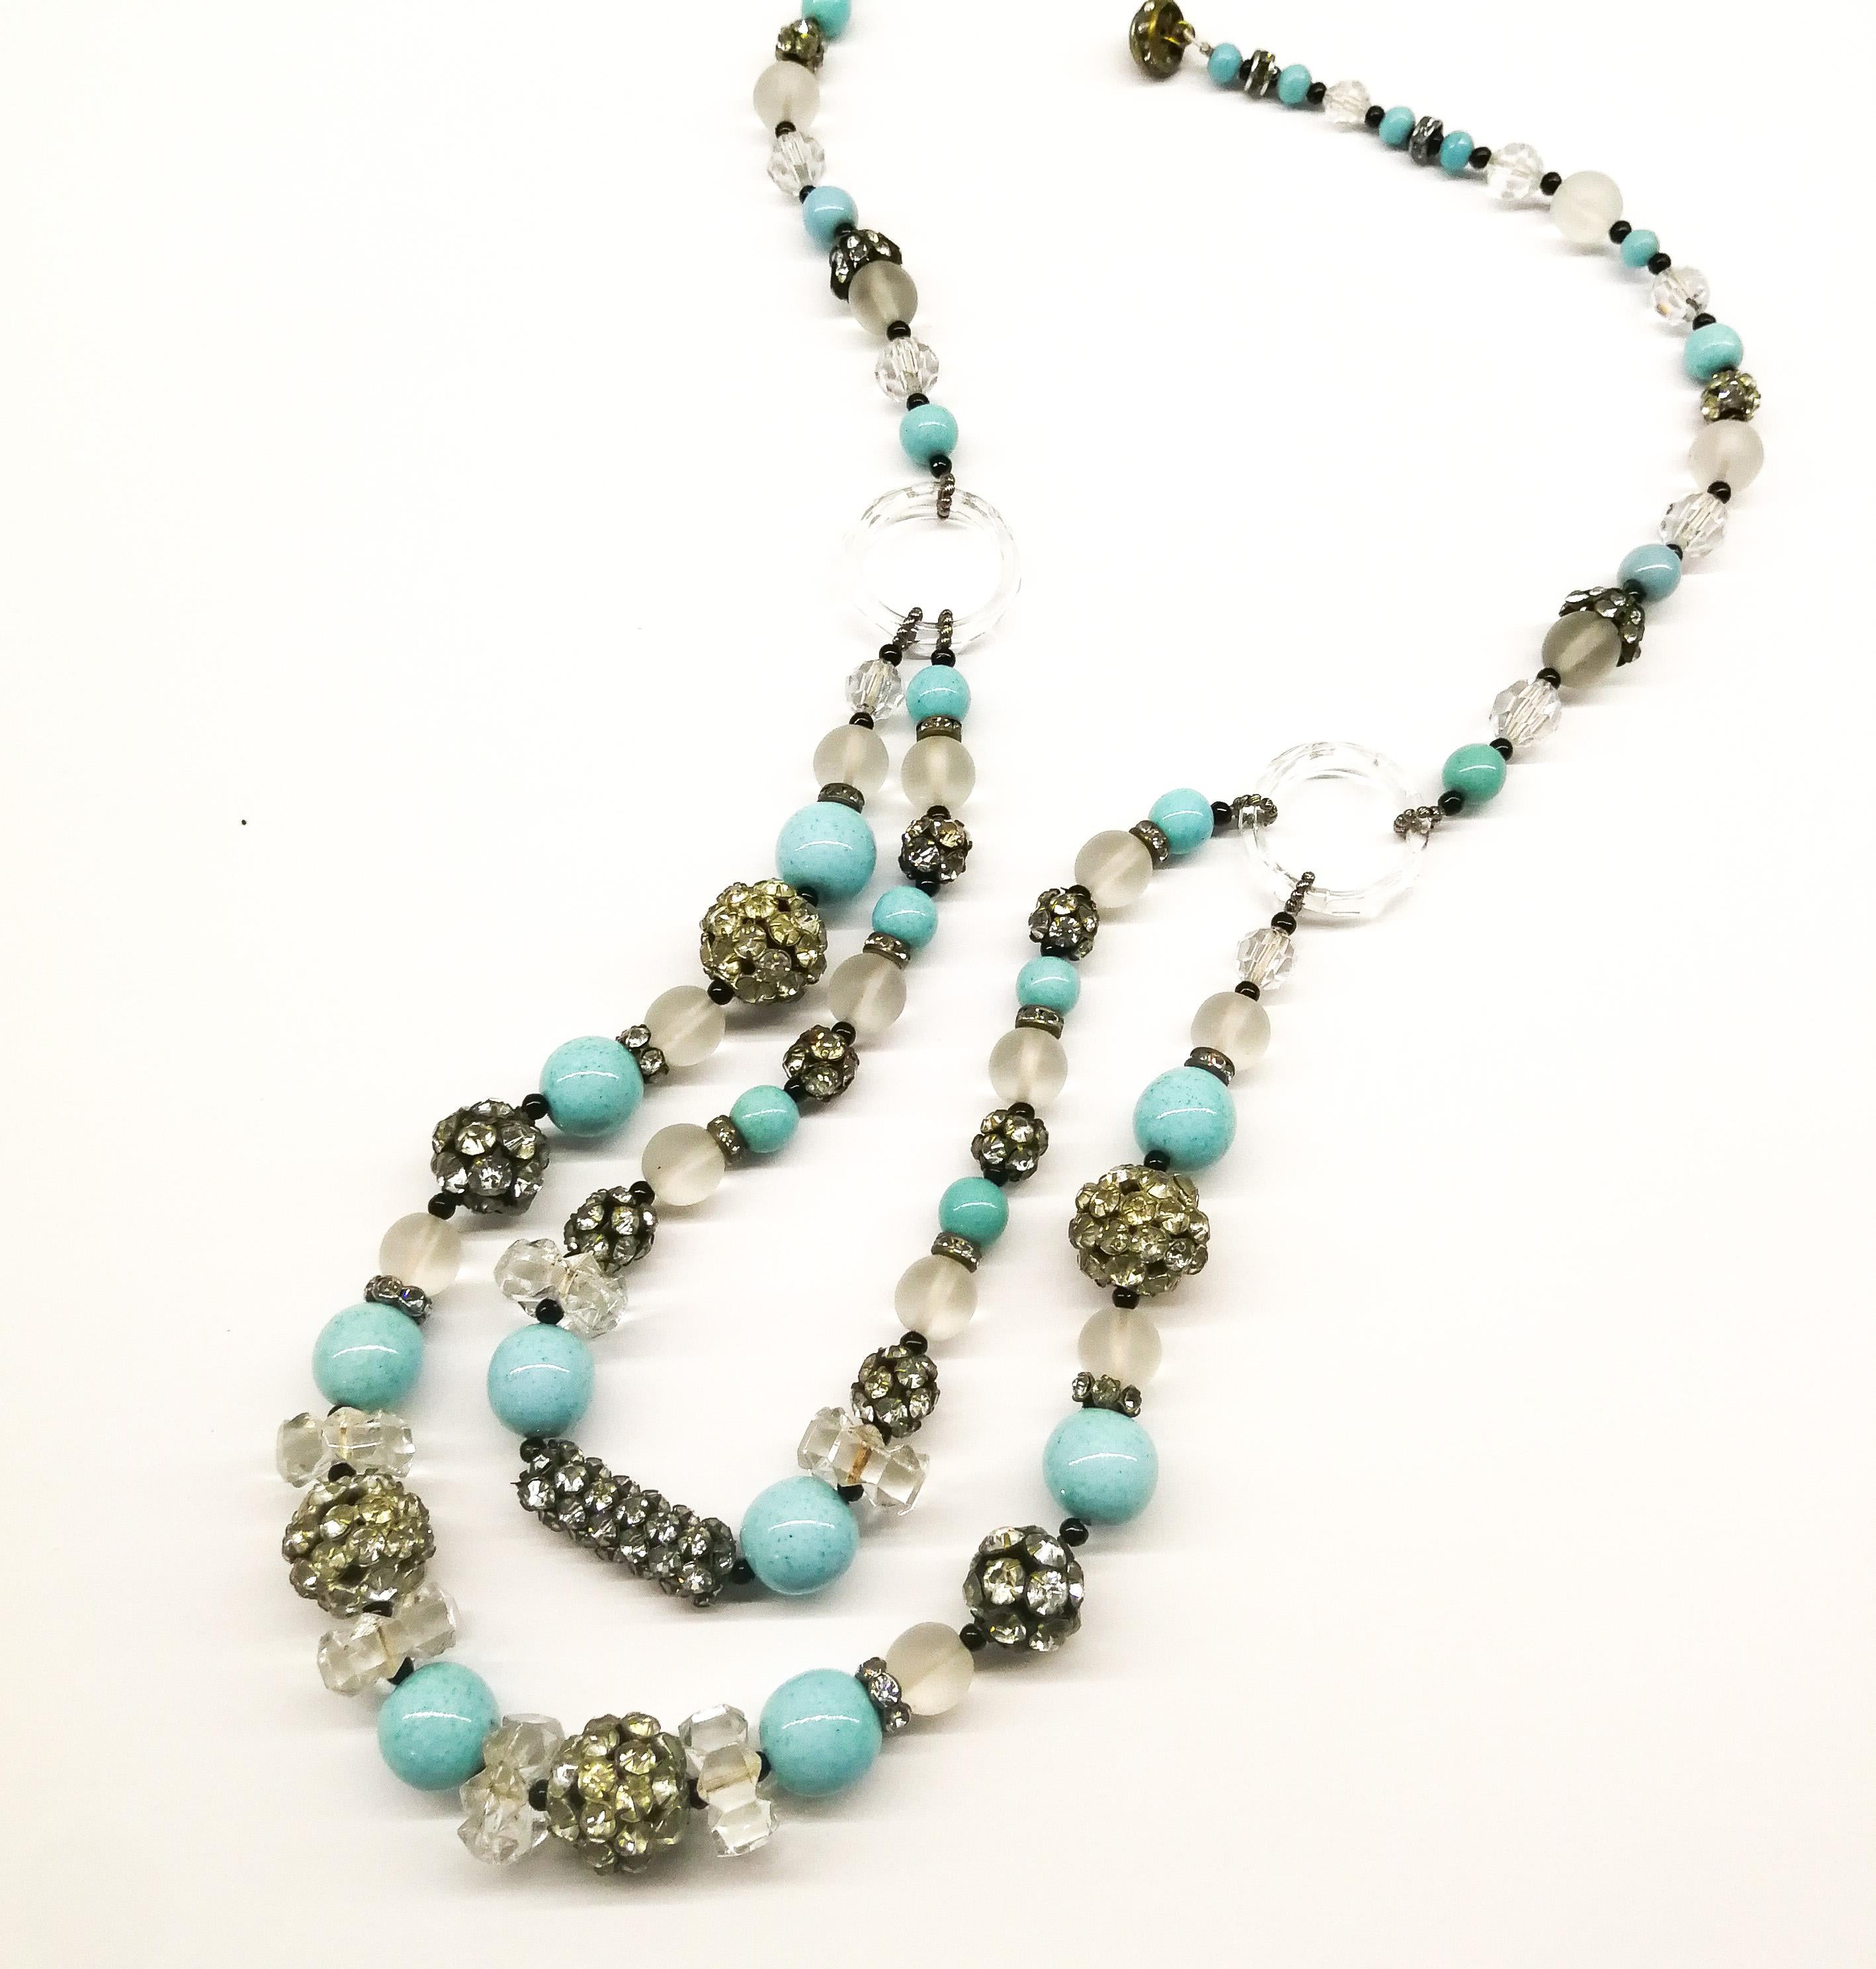 This beautiful beaded necklace, highly characteristic of the 1920s, has a bright and dramatic colour combination of turquoise and black, interspersed with frosted and clear glass beads, and clear paste elements. A single row descends to a faceted